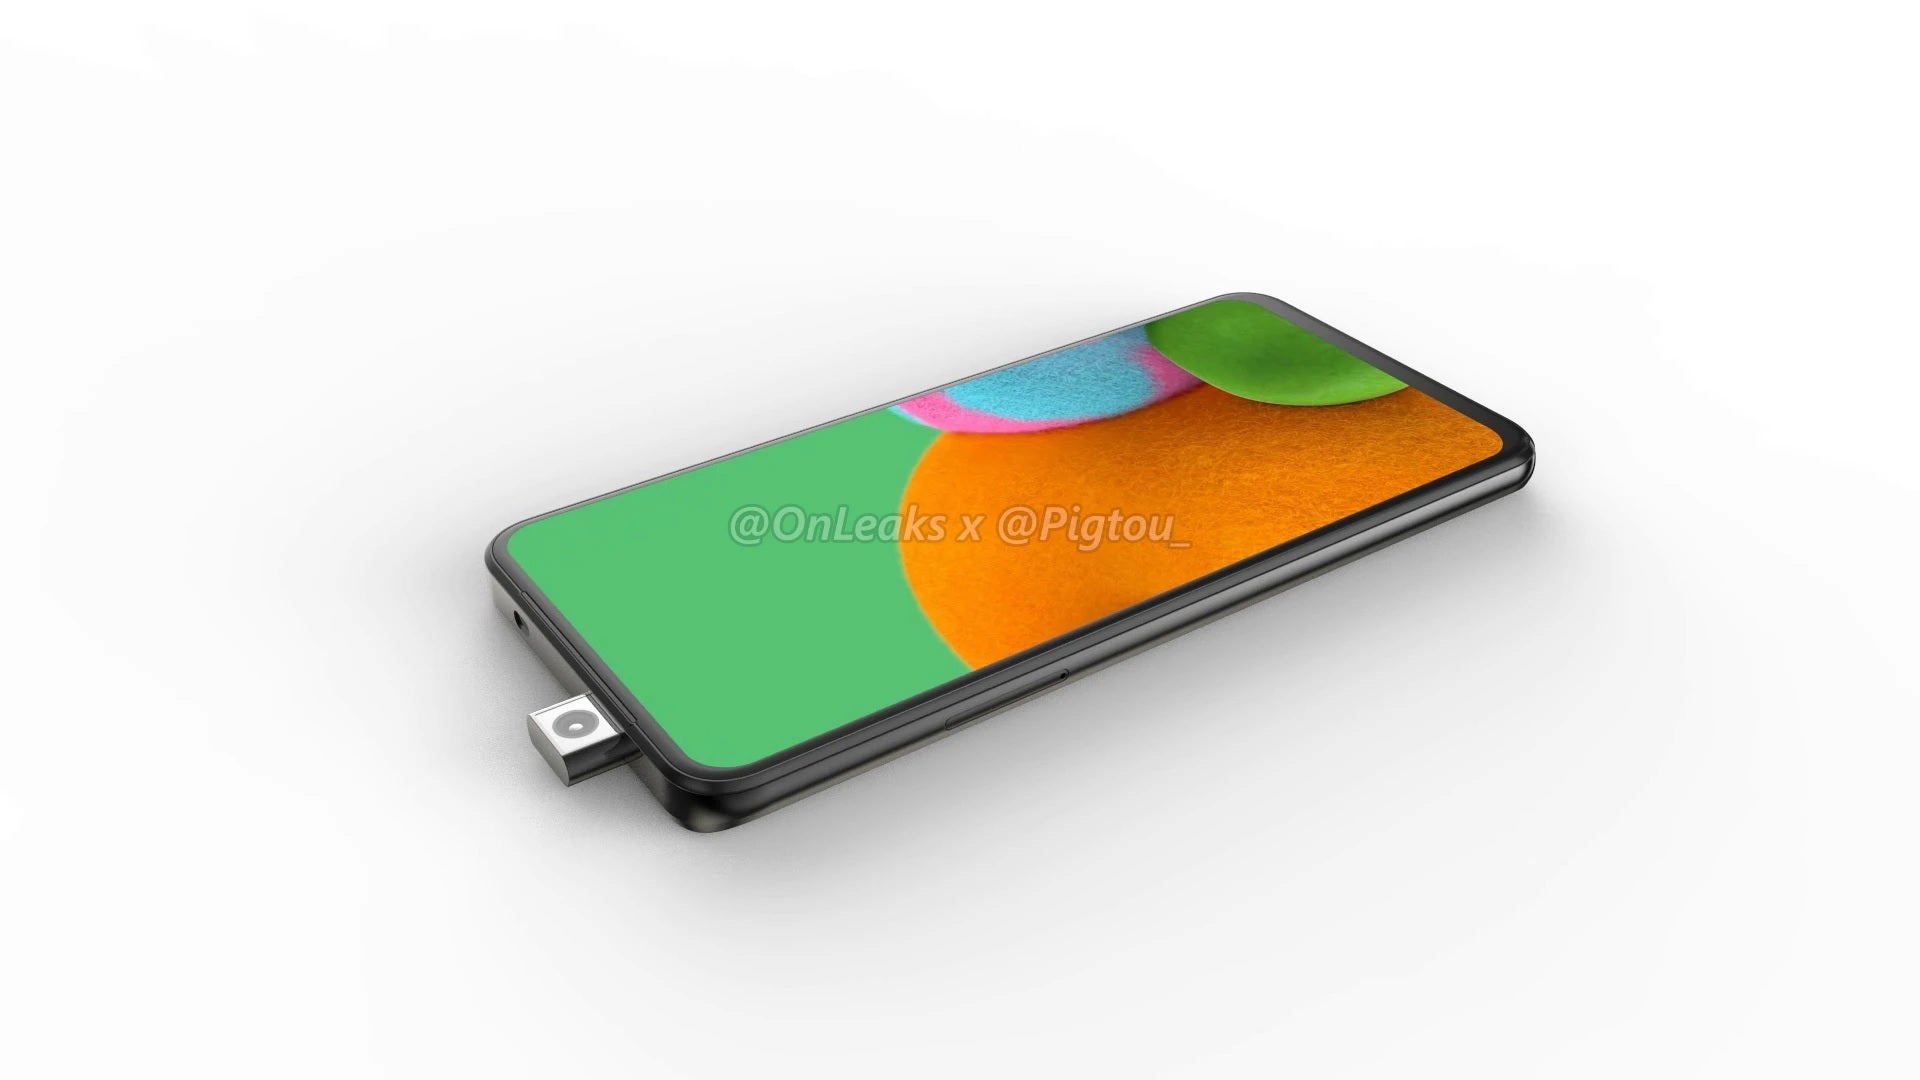 Render allegedly shows Samsung's first smartphone to sport a pop-up selfie camera - Renders allegedly reveal Samsung's first phone with a pop-up camera; 5G support not clear